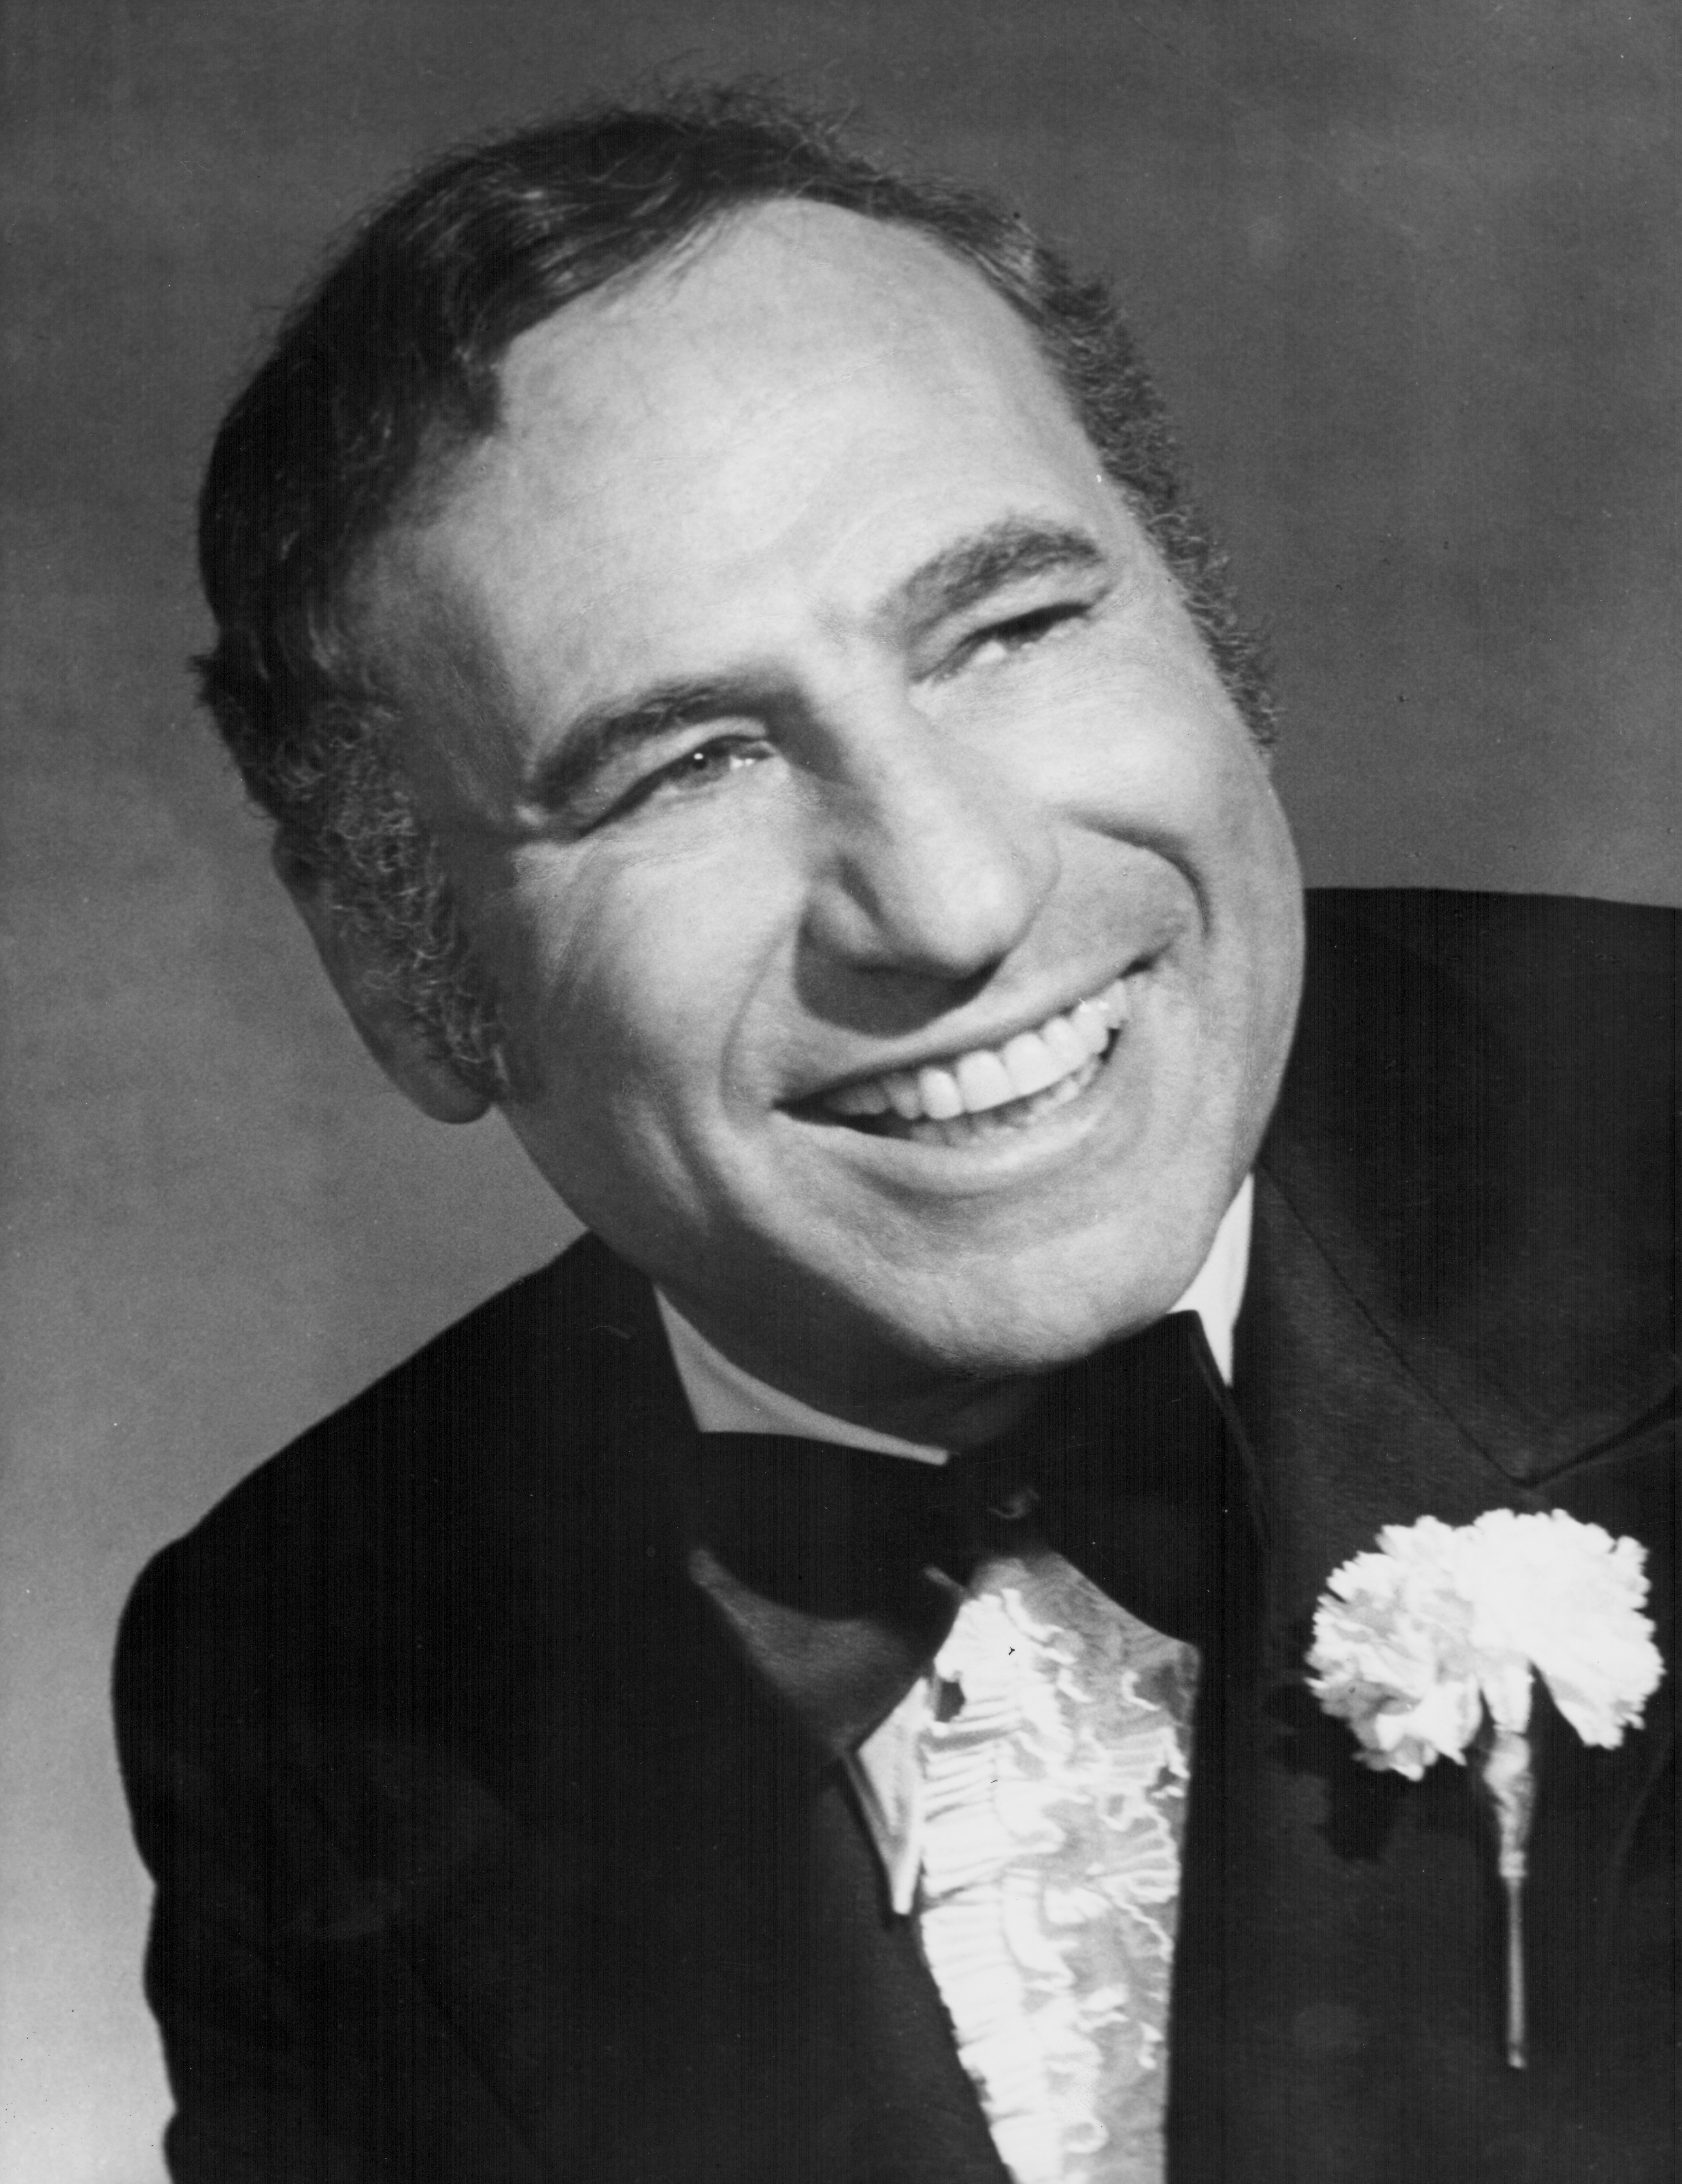 Director Mel Brooks as Mel Funn in the comedy film "Silent Movie" on January 1, 1976 ┃Source: Getty Images